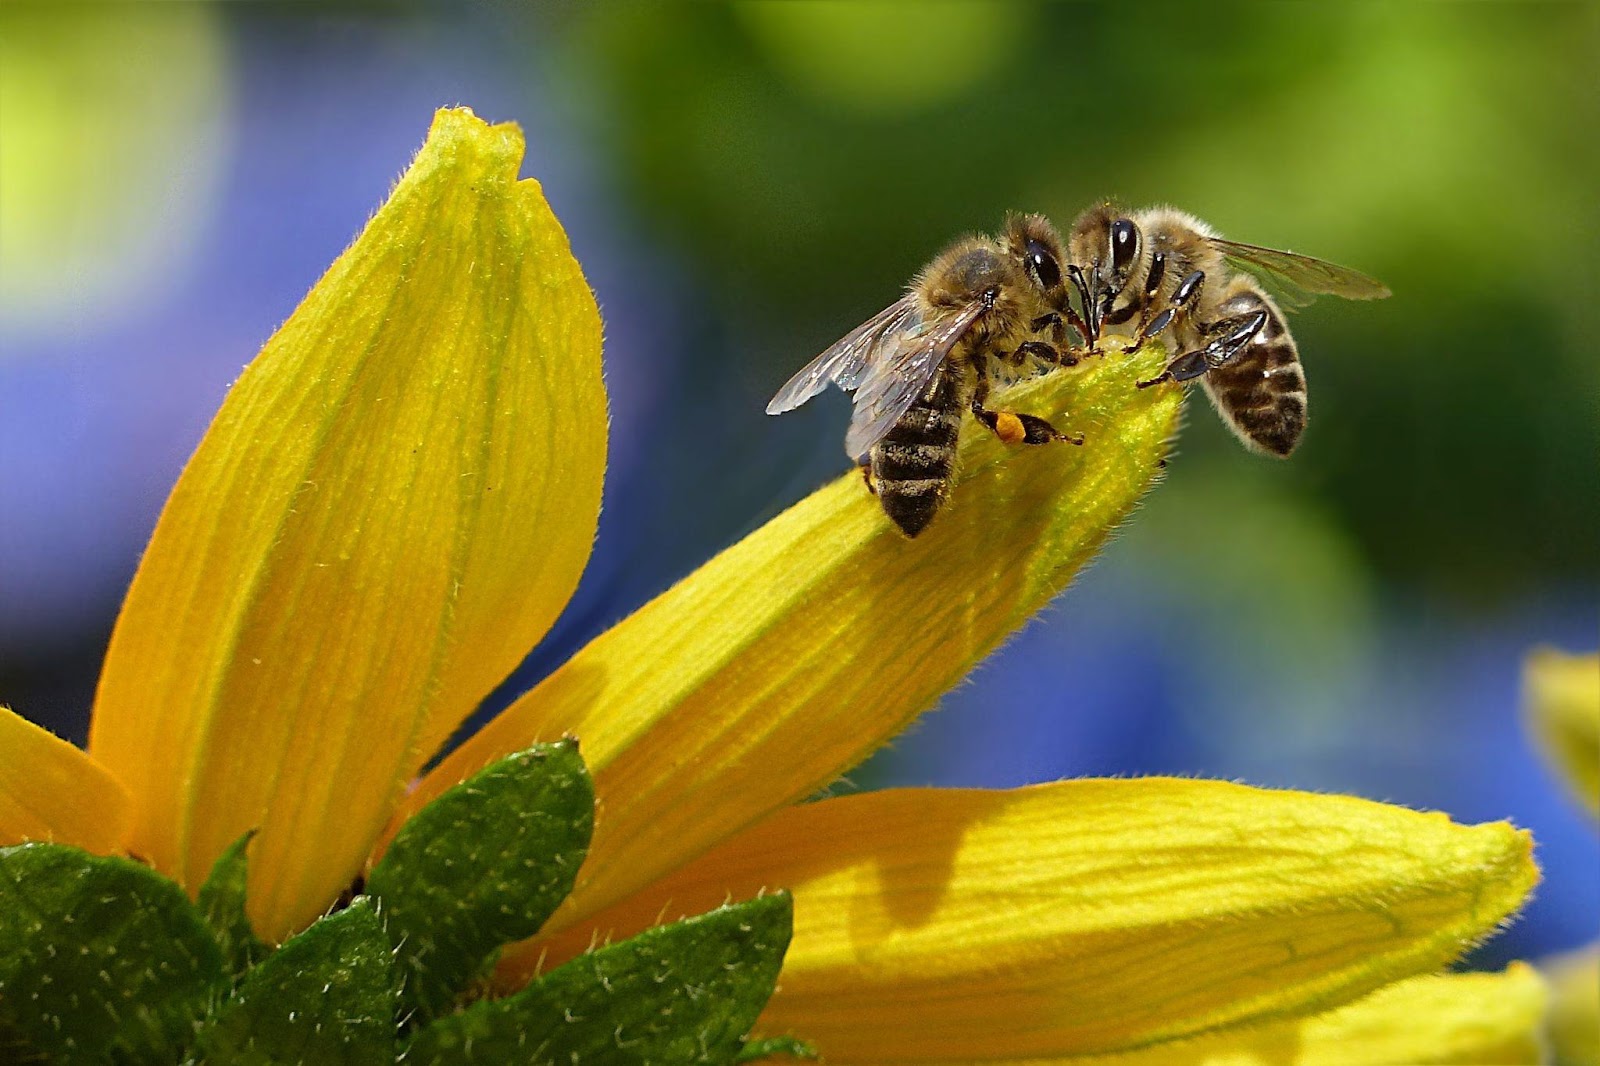 Challenges You Might Face While Beekeeping in Your Garden